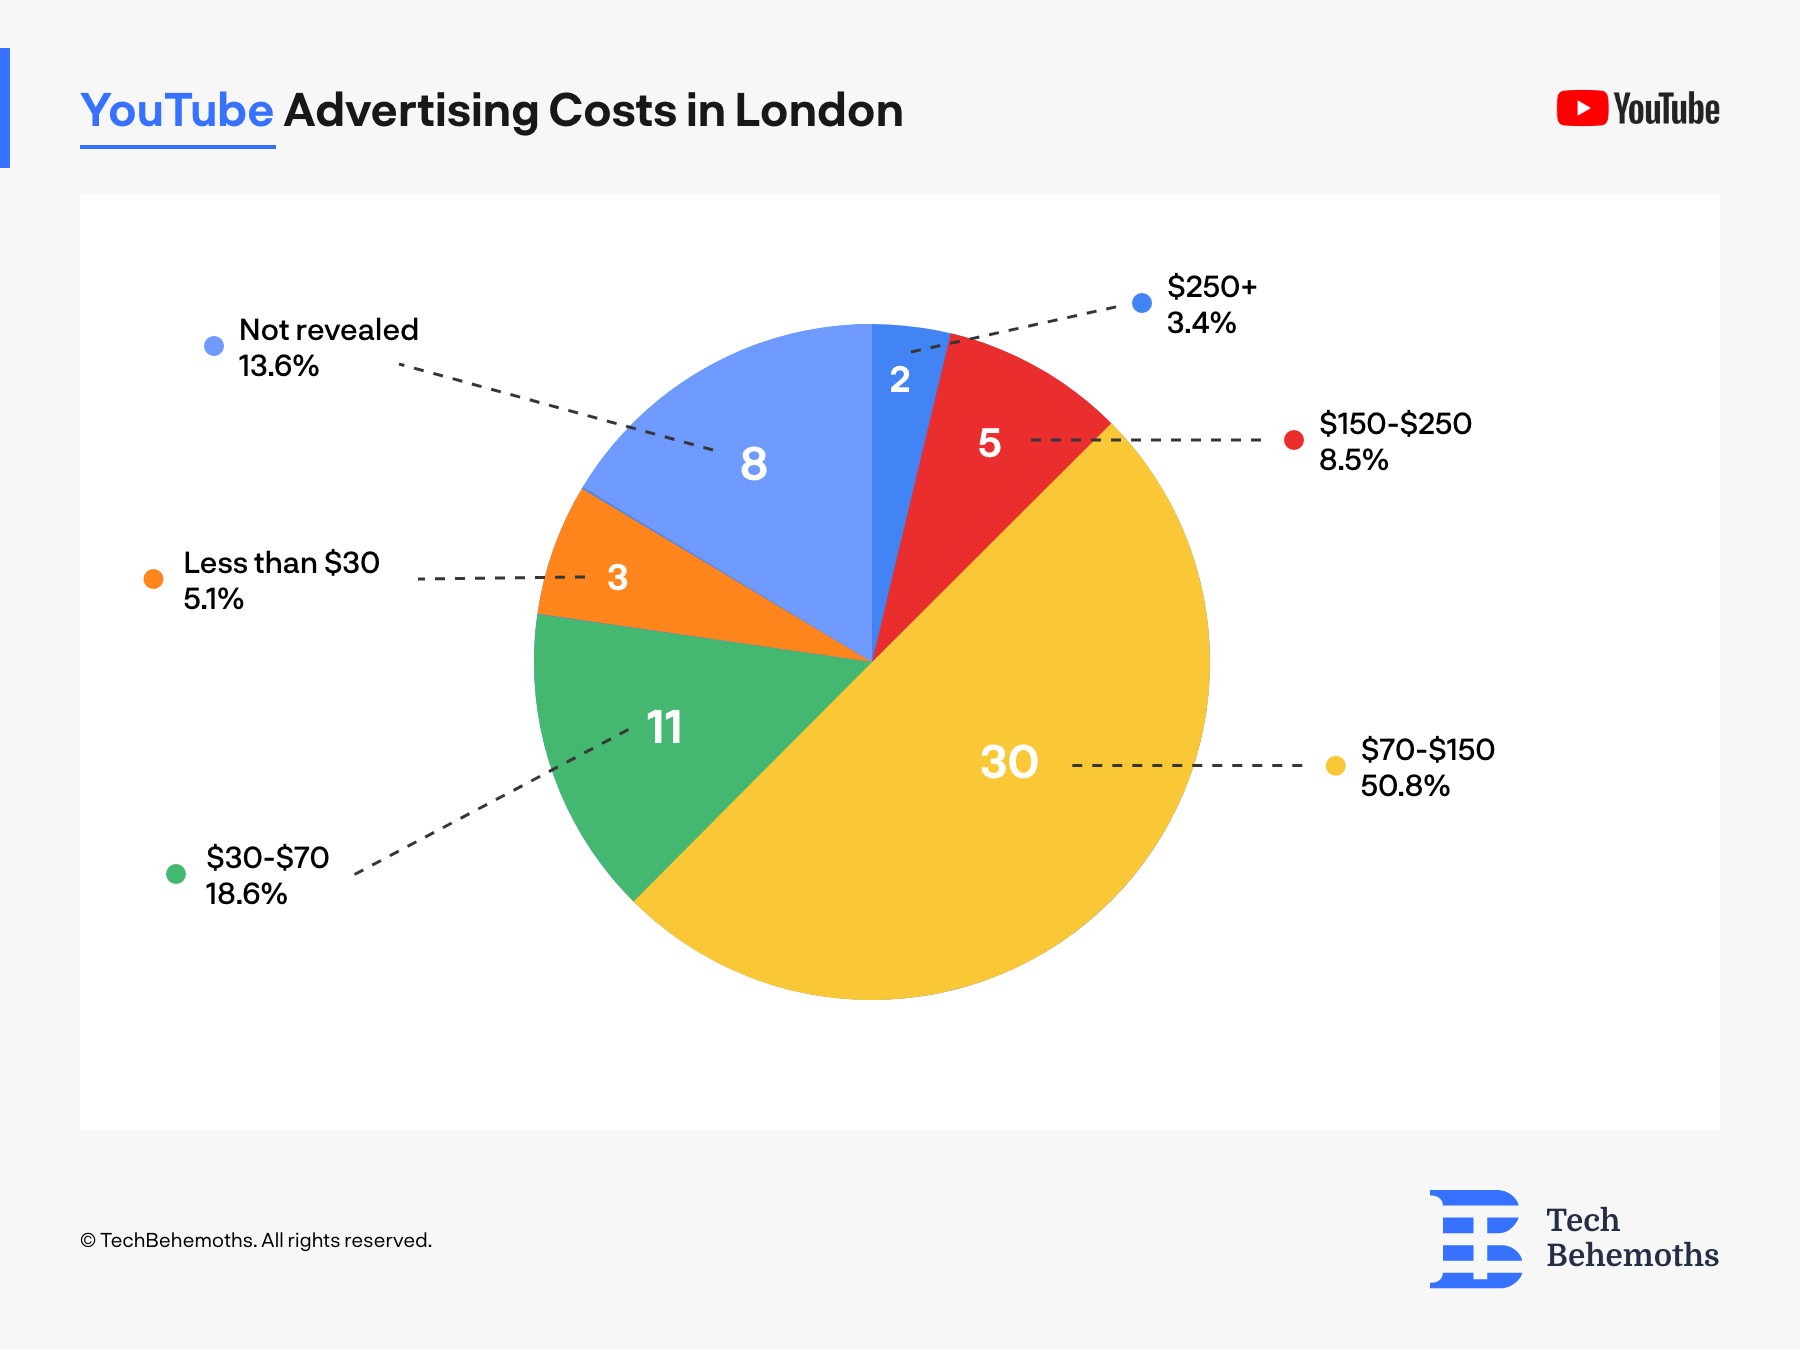 Costs of YouTube advertising services in London